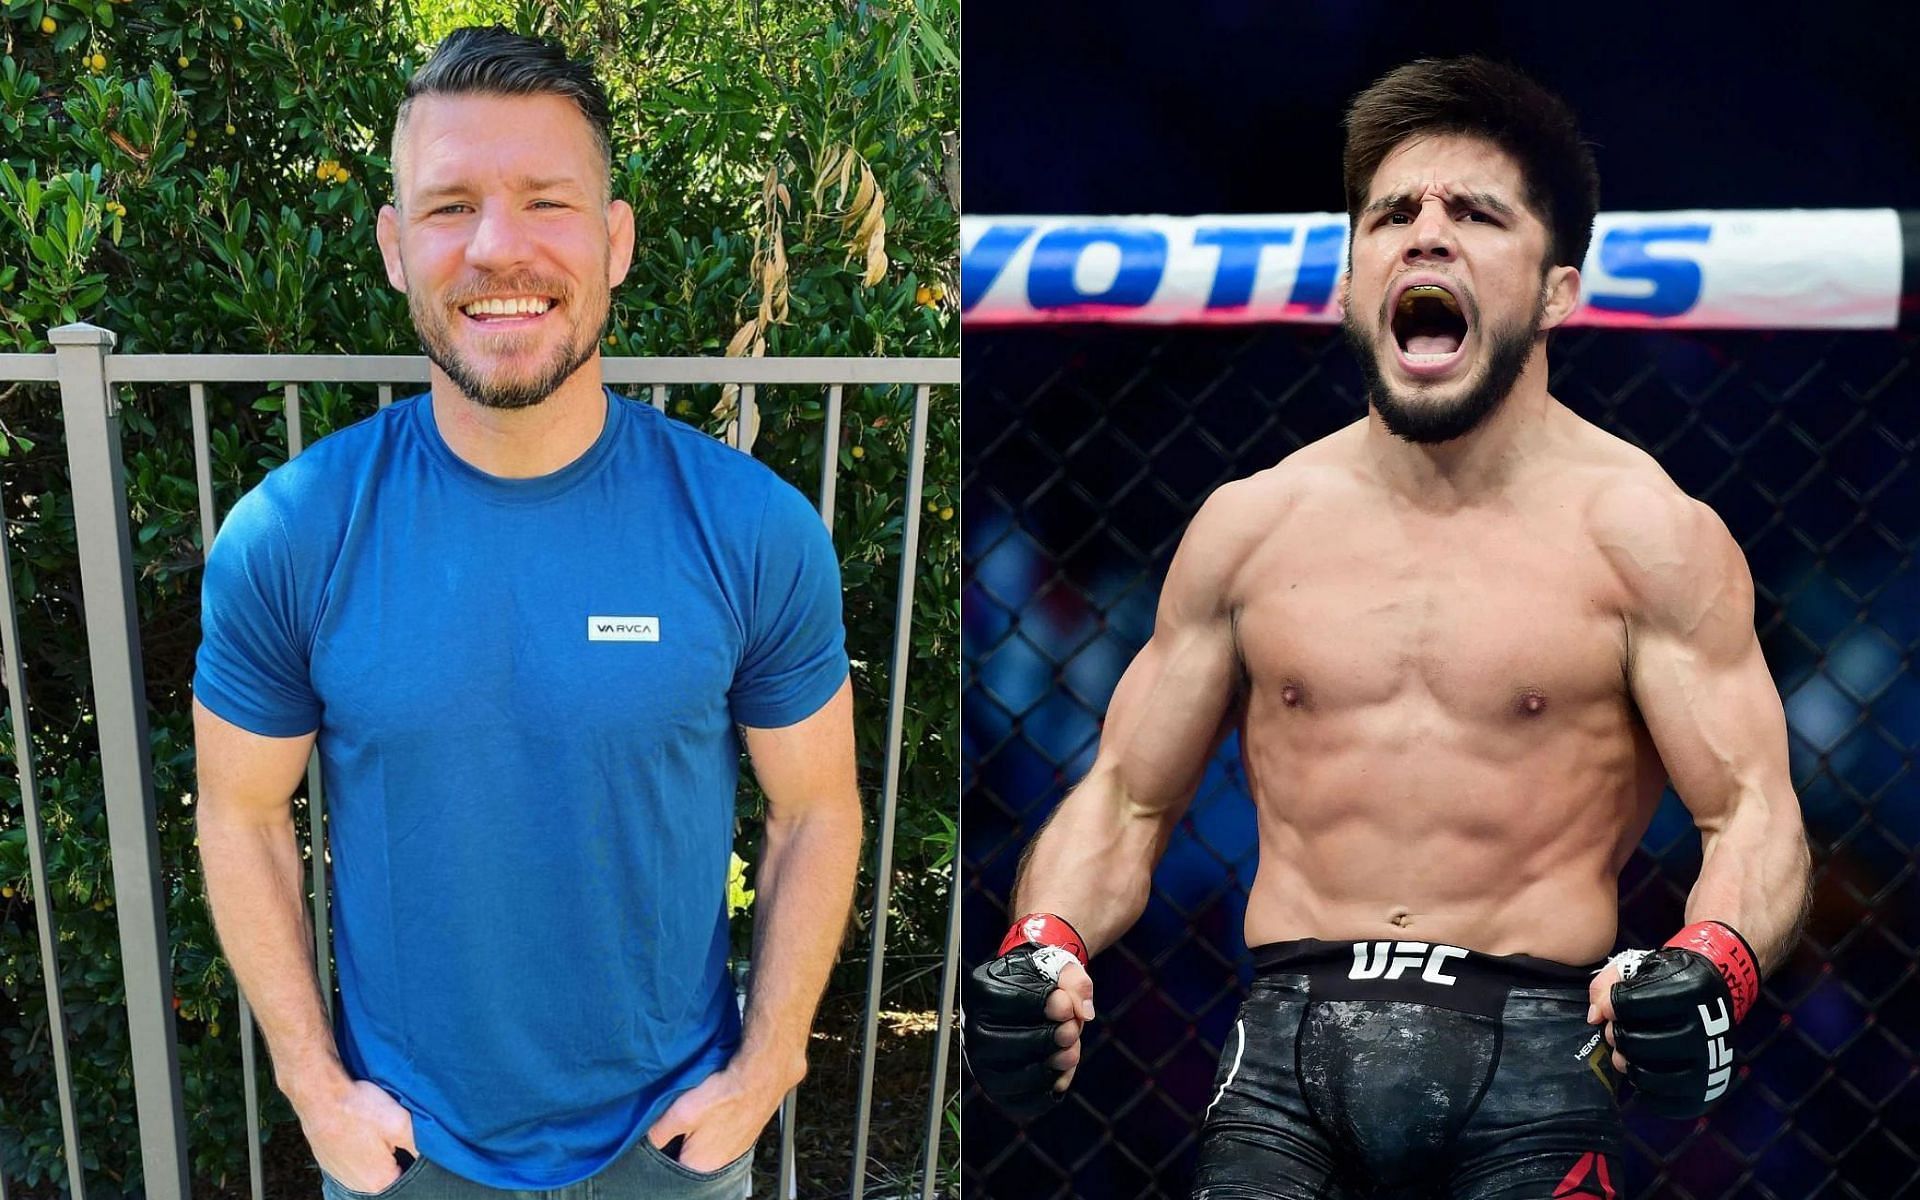 Michael Bisping (left) and Henry Cejudo (right)